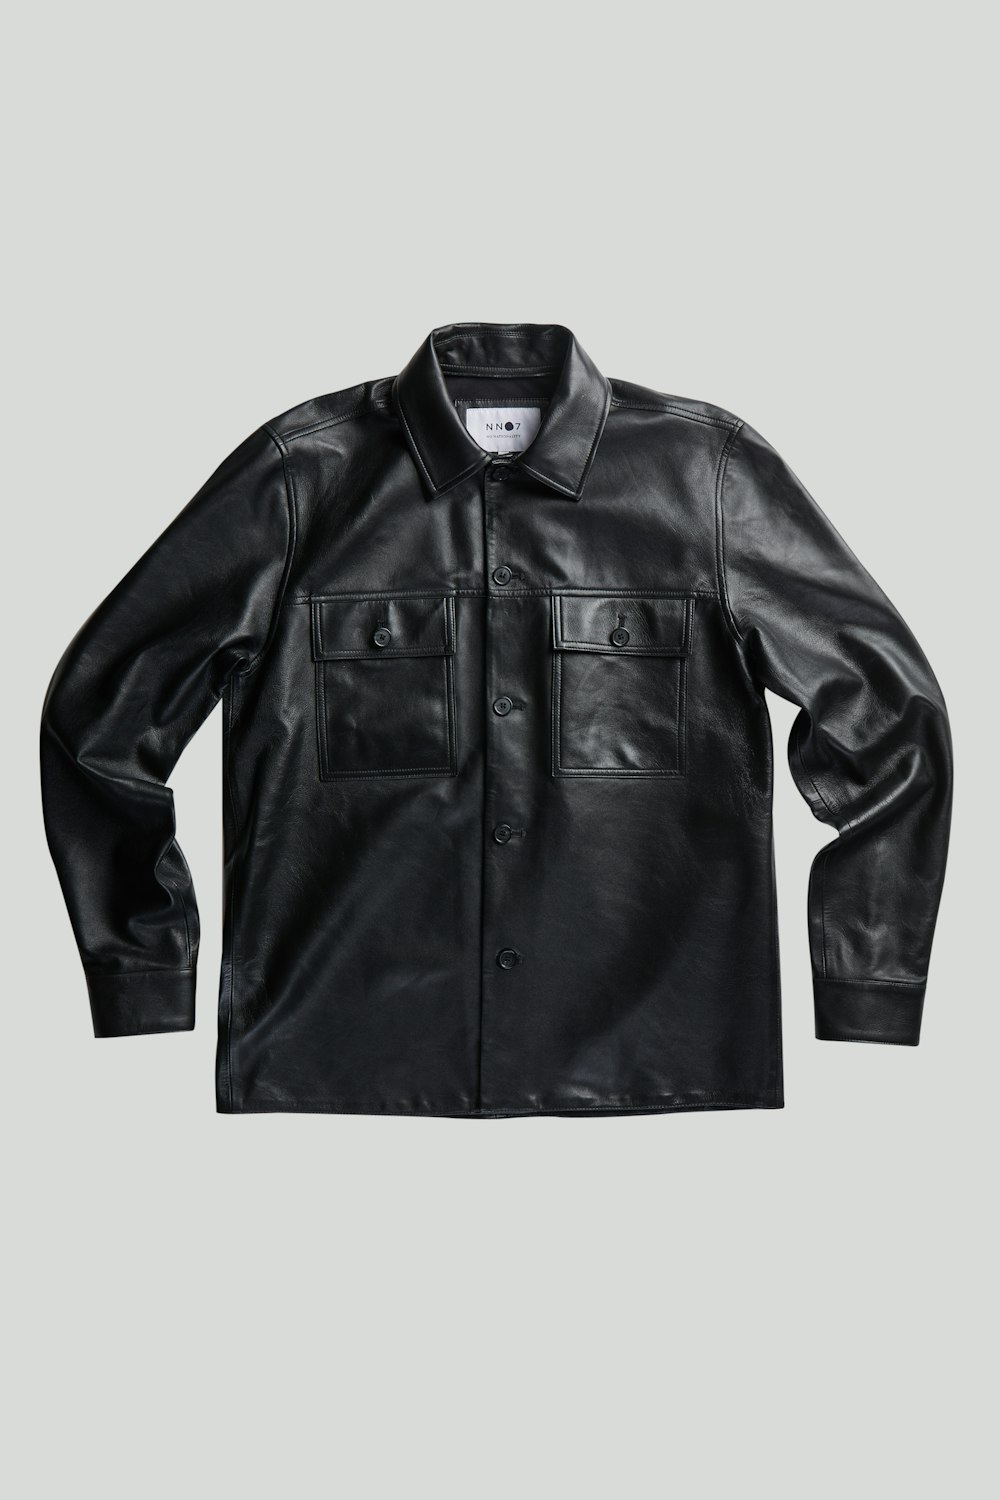 Silas Leather 8232